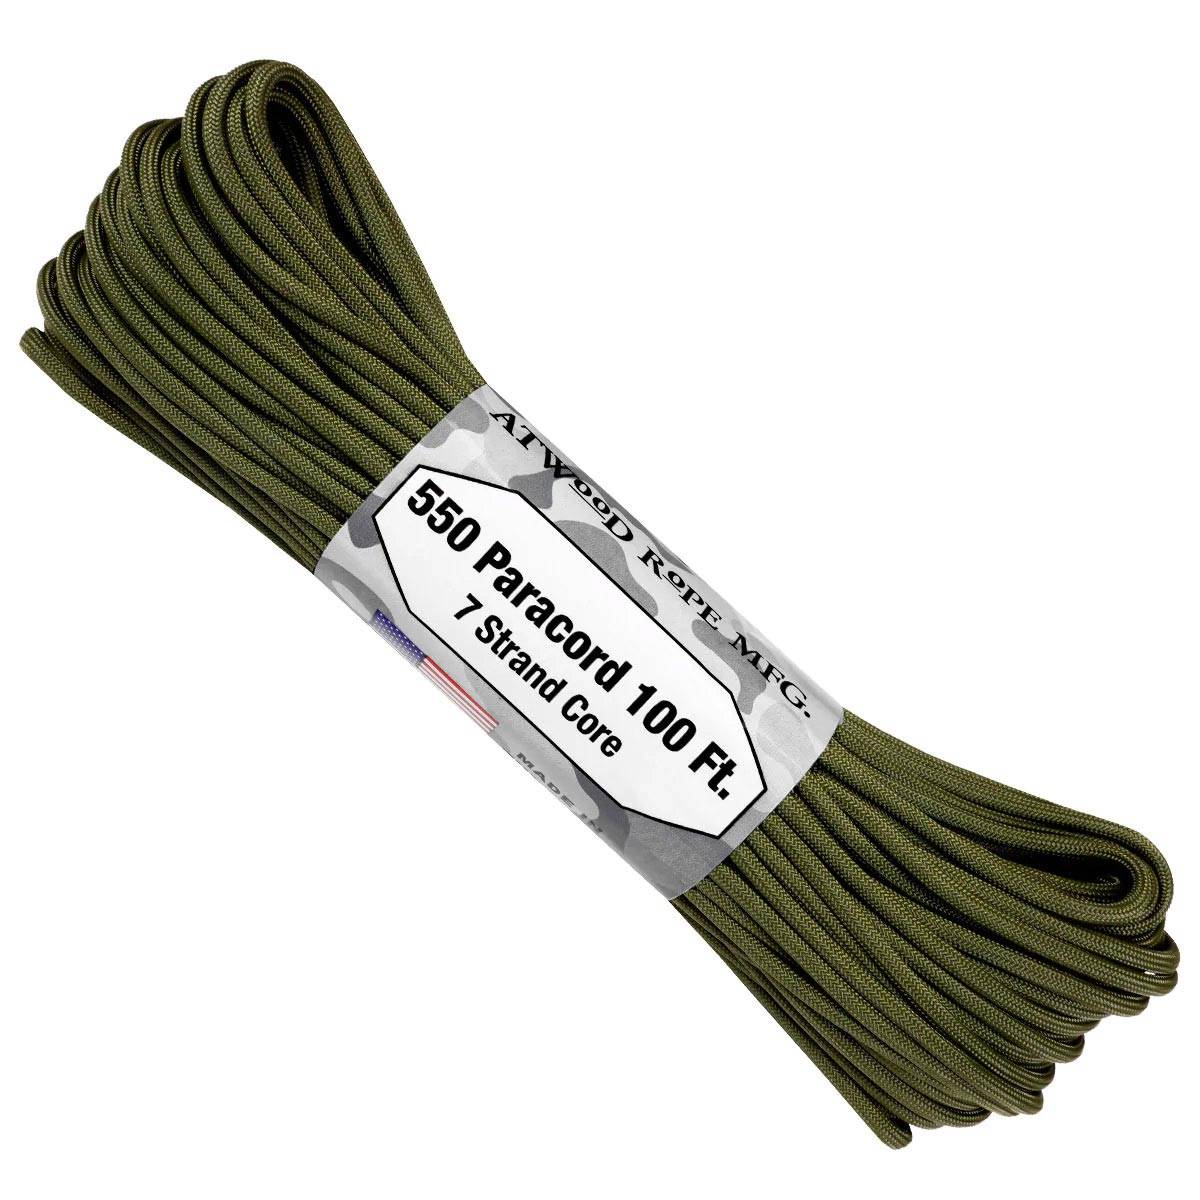 ATWOOD ROPE 7 STRAND 550 PARACORD 100 FT